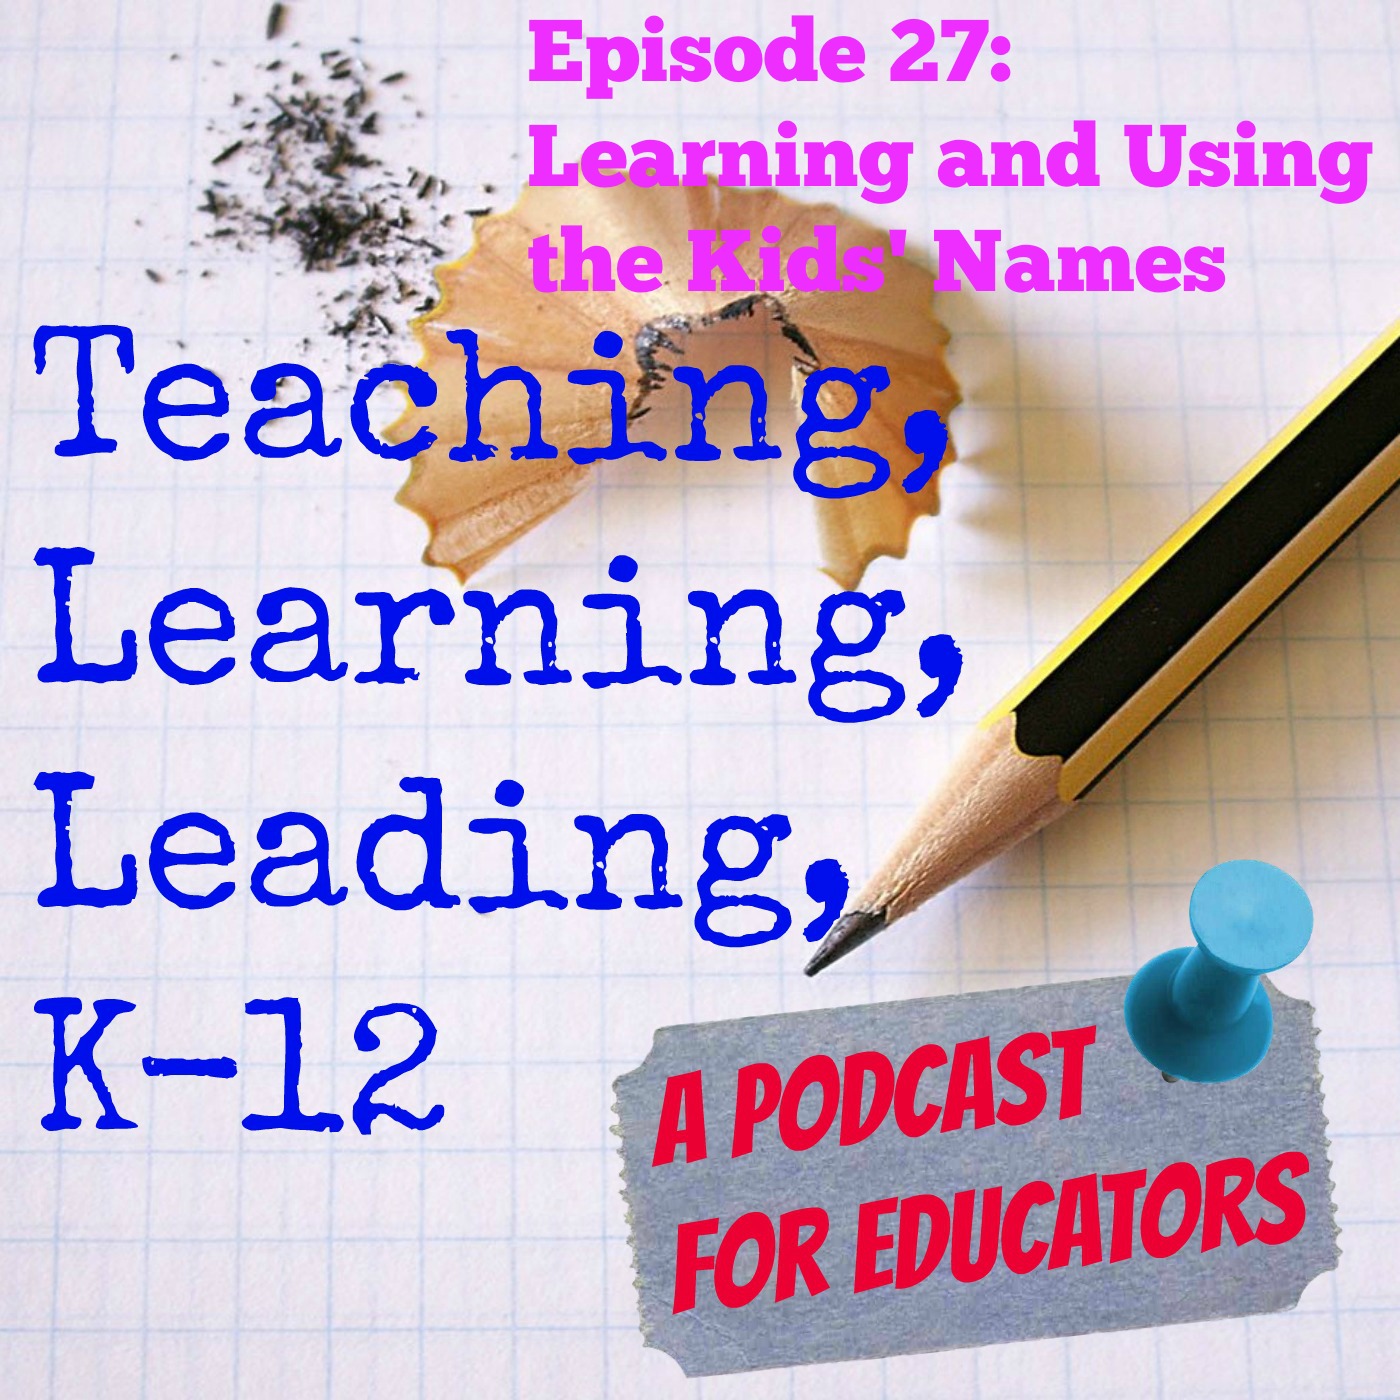 Episode 27: Teaching Tip/ Learning the Kids' Names